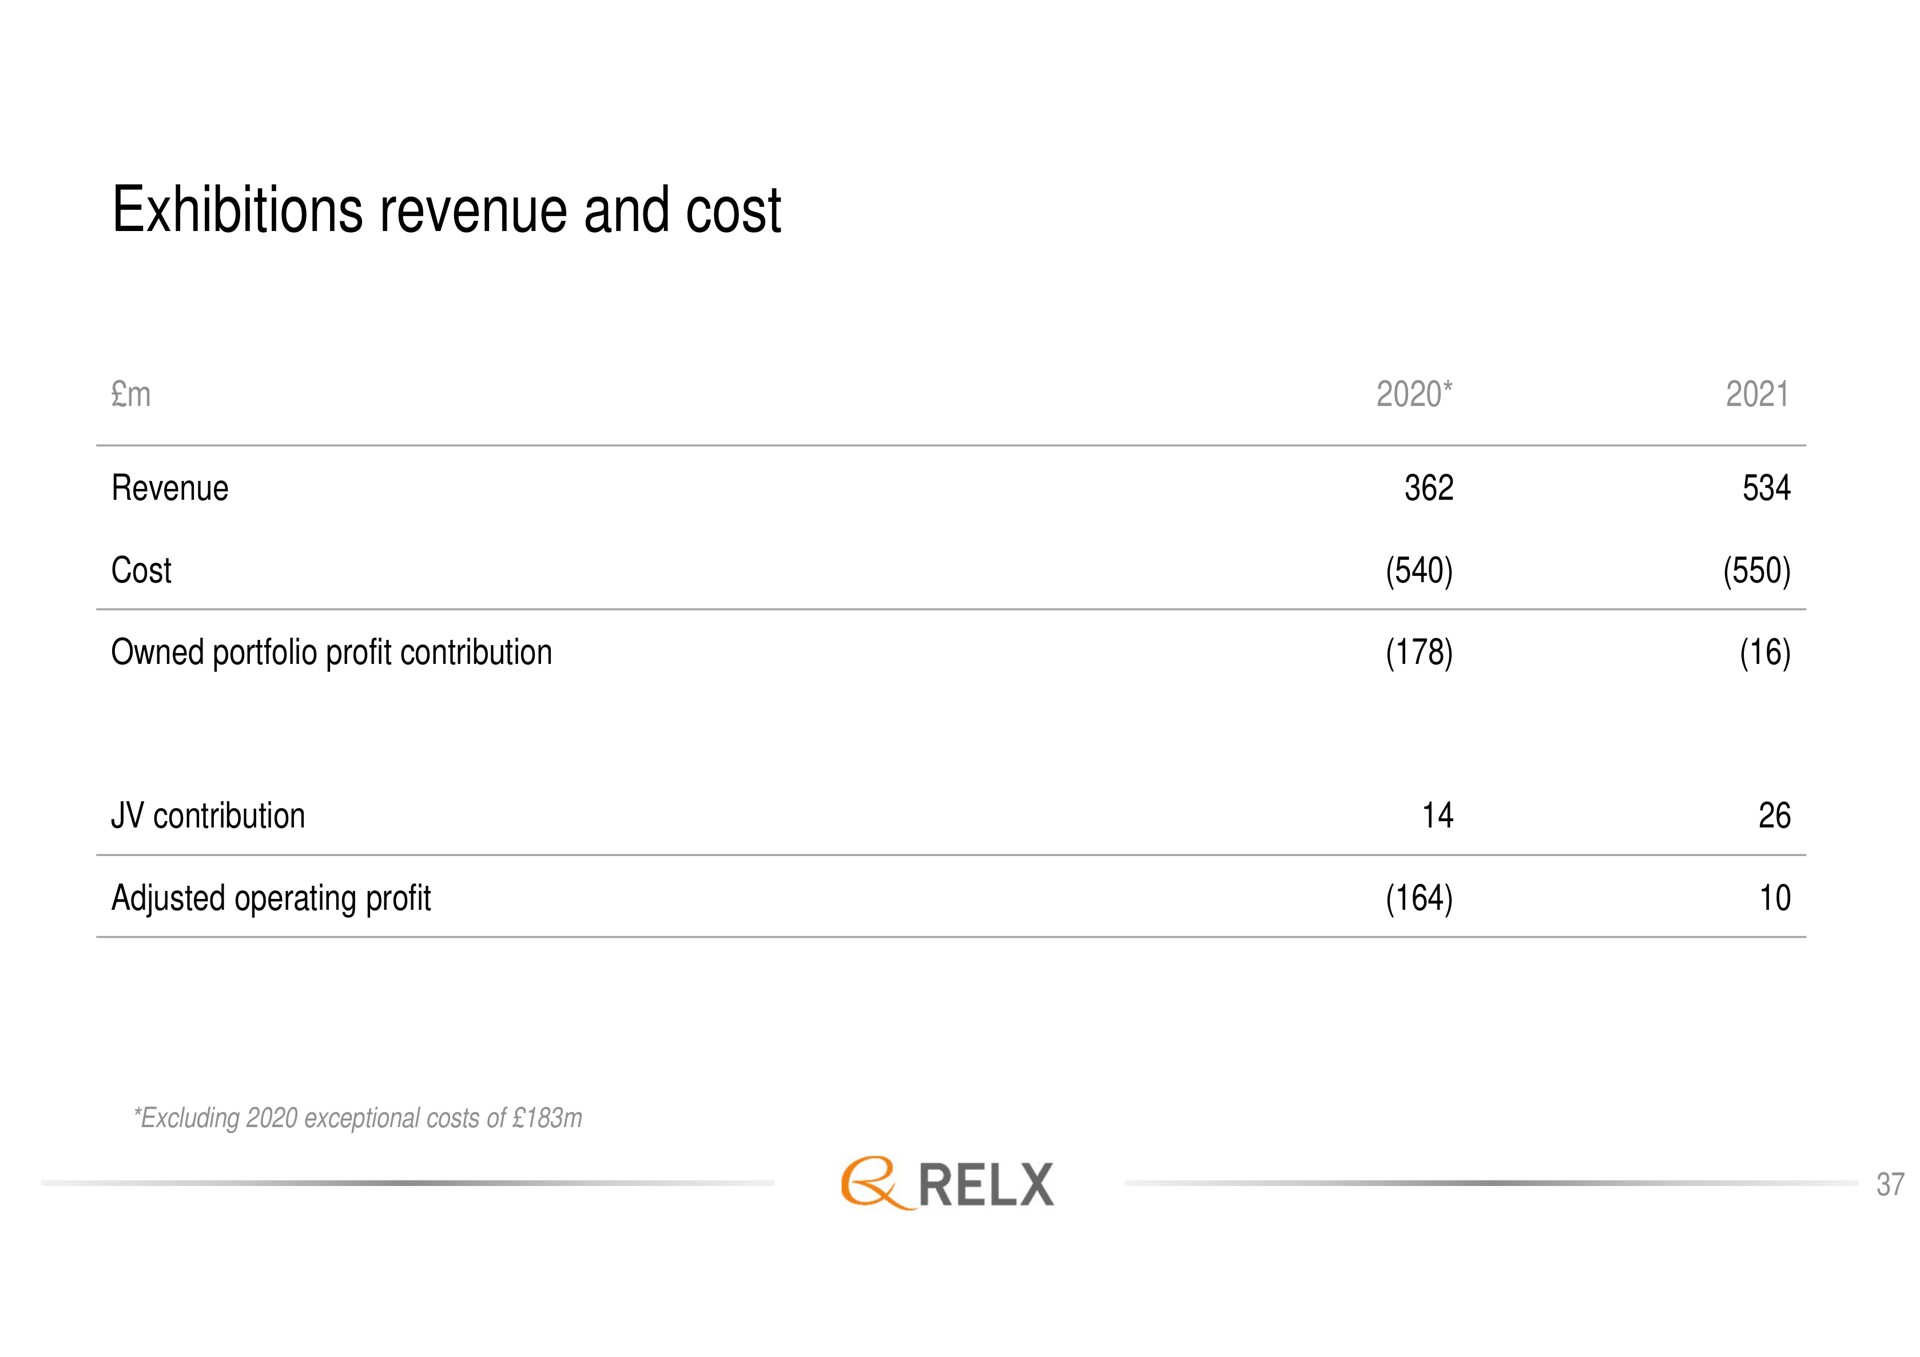 exhibitions revenue and cost | RELX